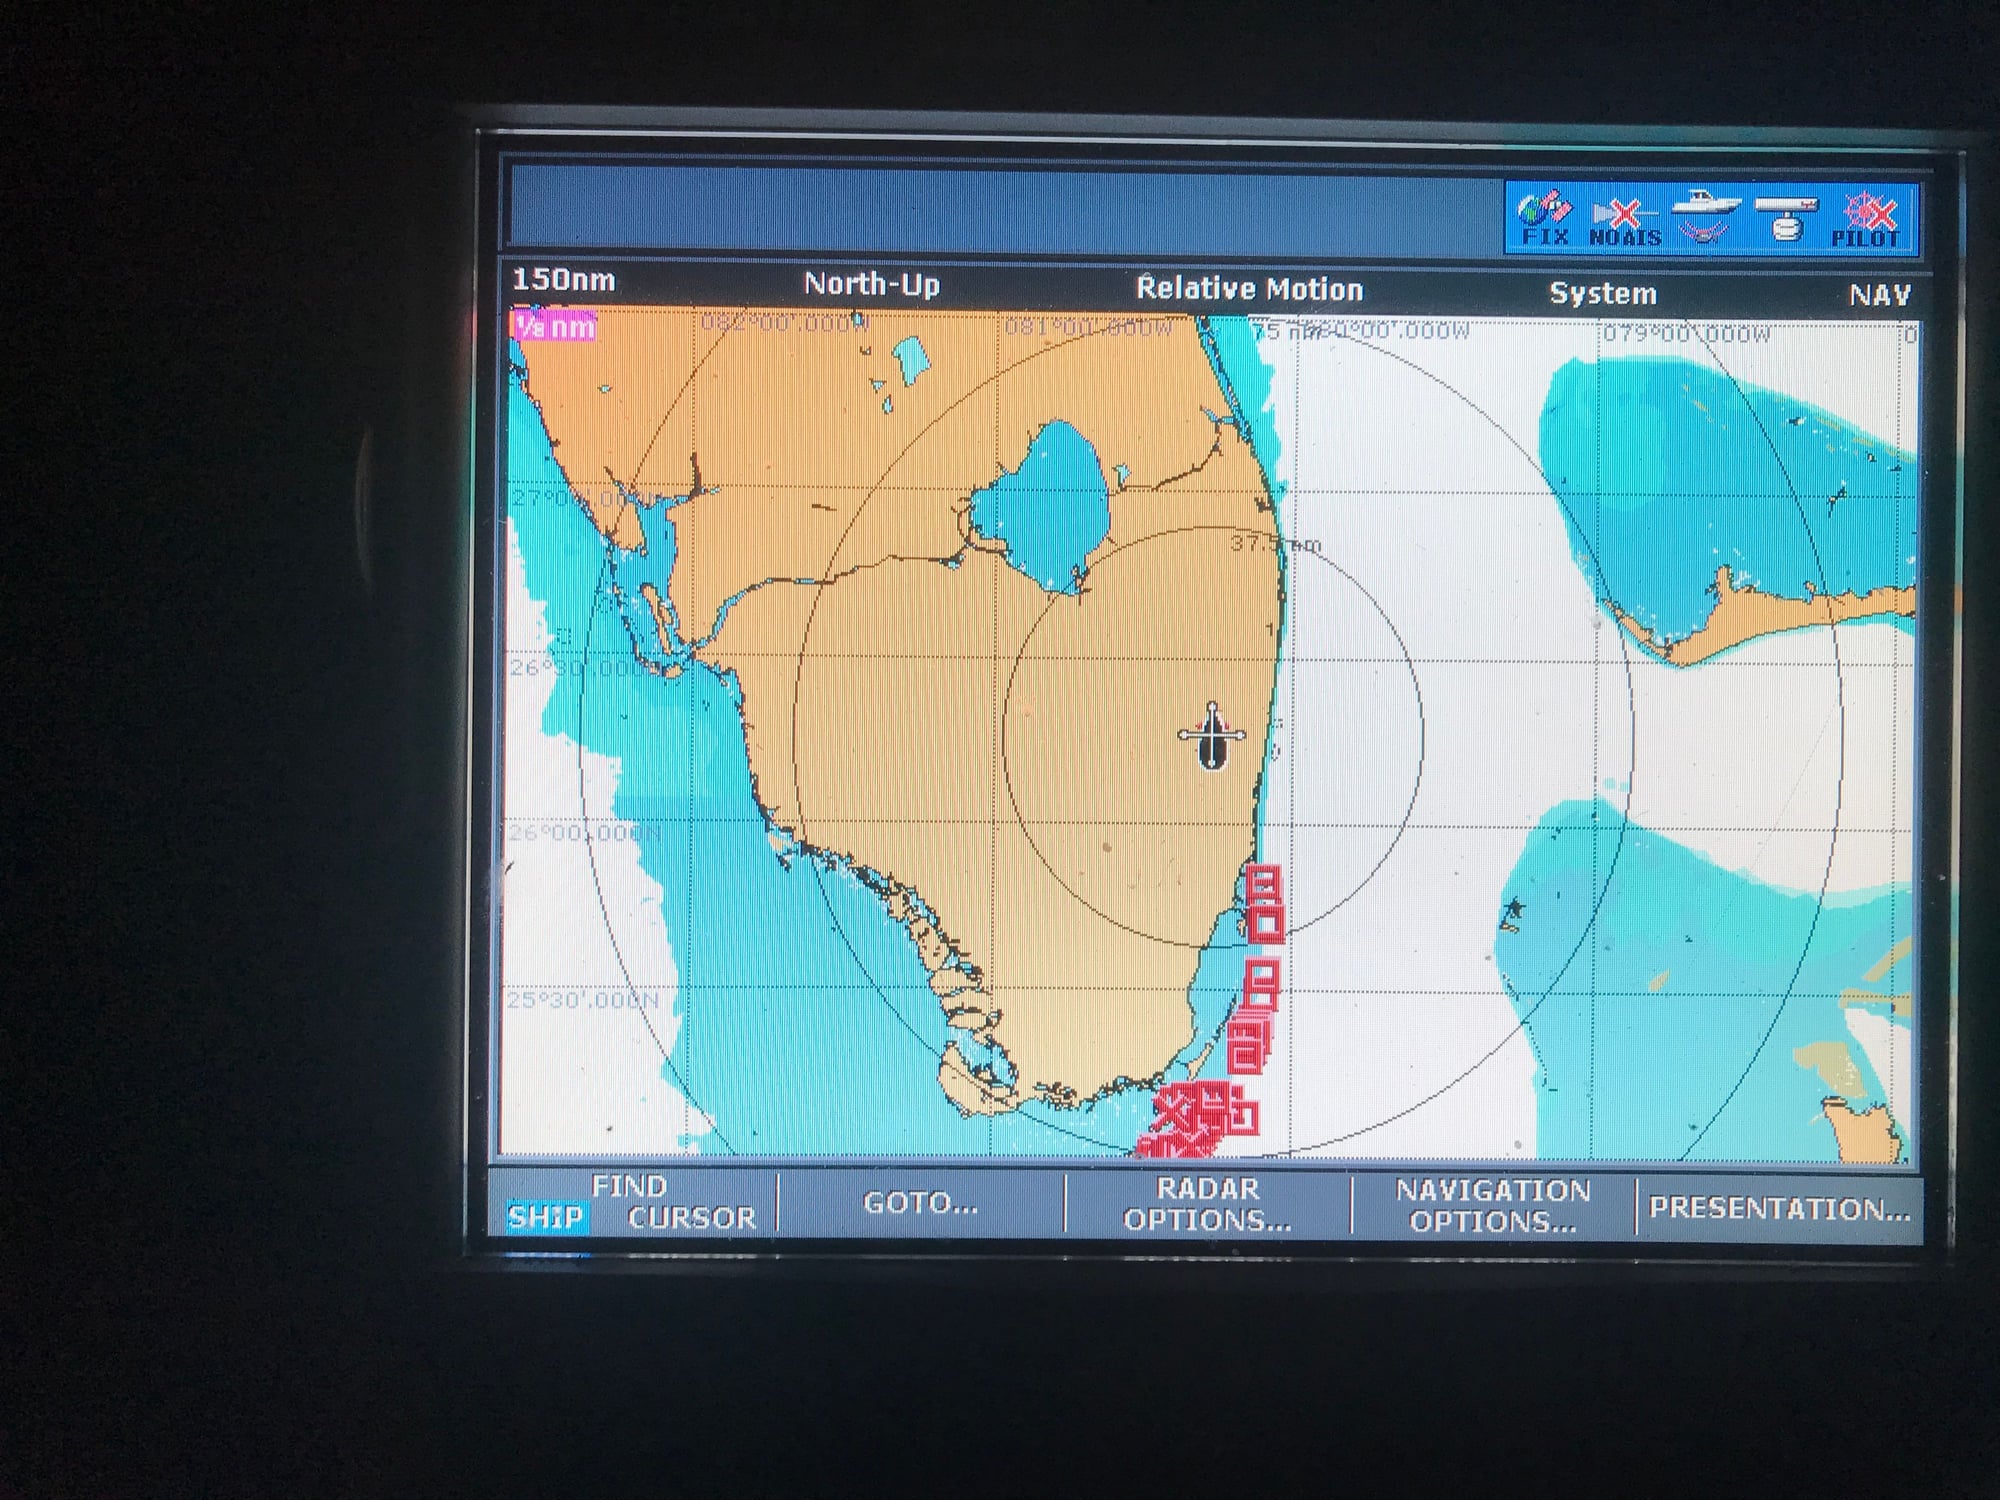 Raymarine c80 and Radar sold - The Hull Truth - Boating and Fishing Forum